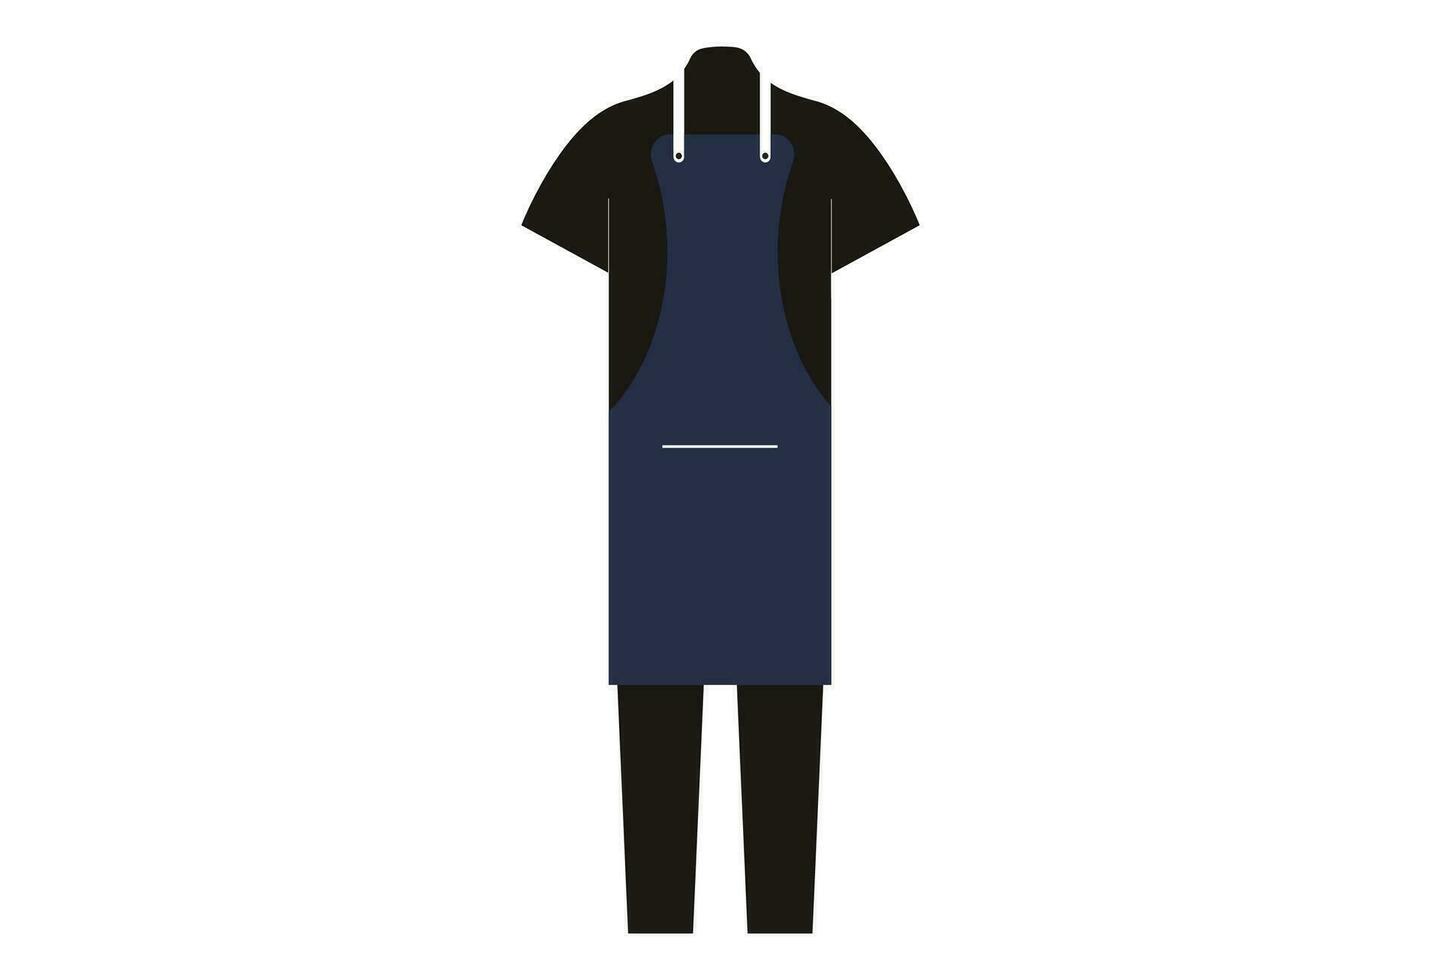 Restaurant Waitress uniform, typically consists of a collared shirt, dress pants or a skirt, and a vest or apron, The uniform may also include a tie or bowtie, as well as comfortable and professional vector